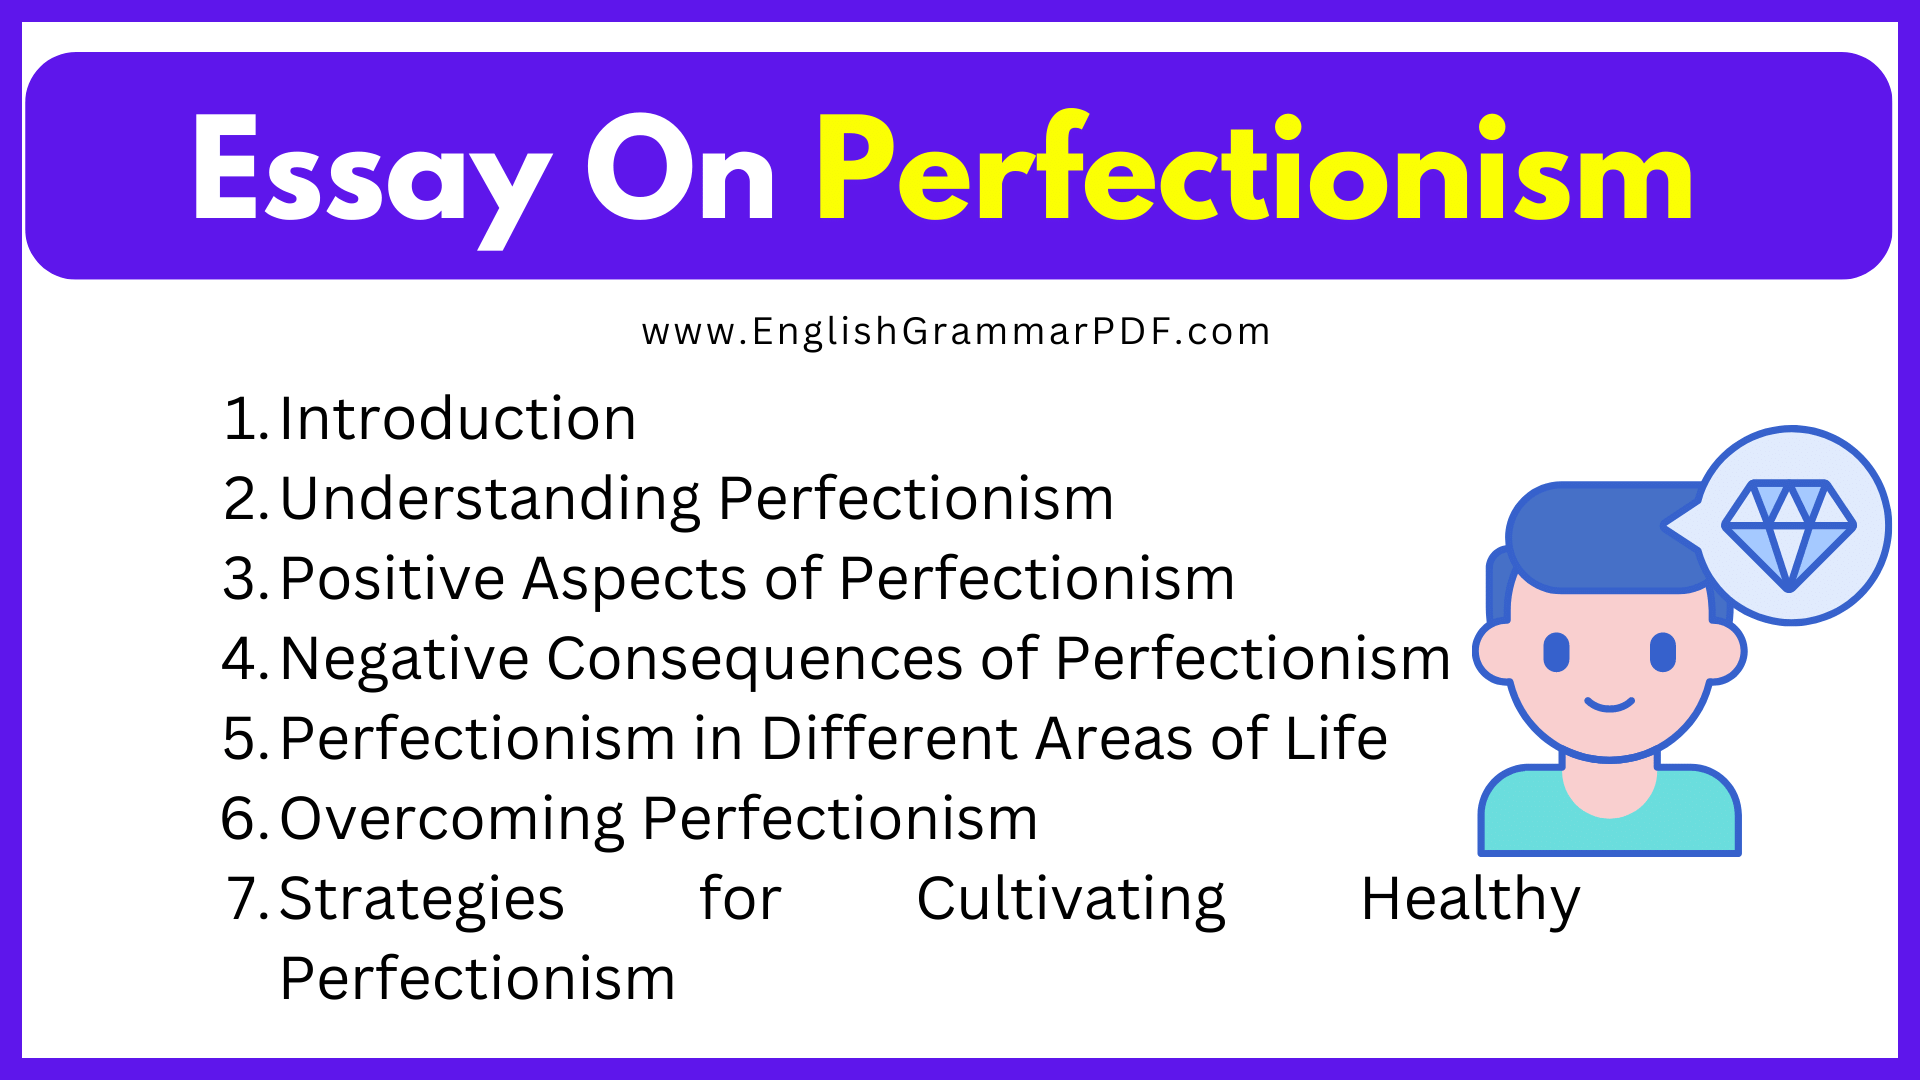 Essay On Perfectionism